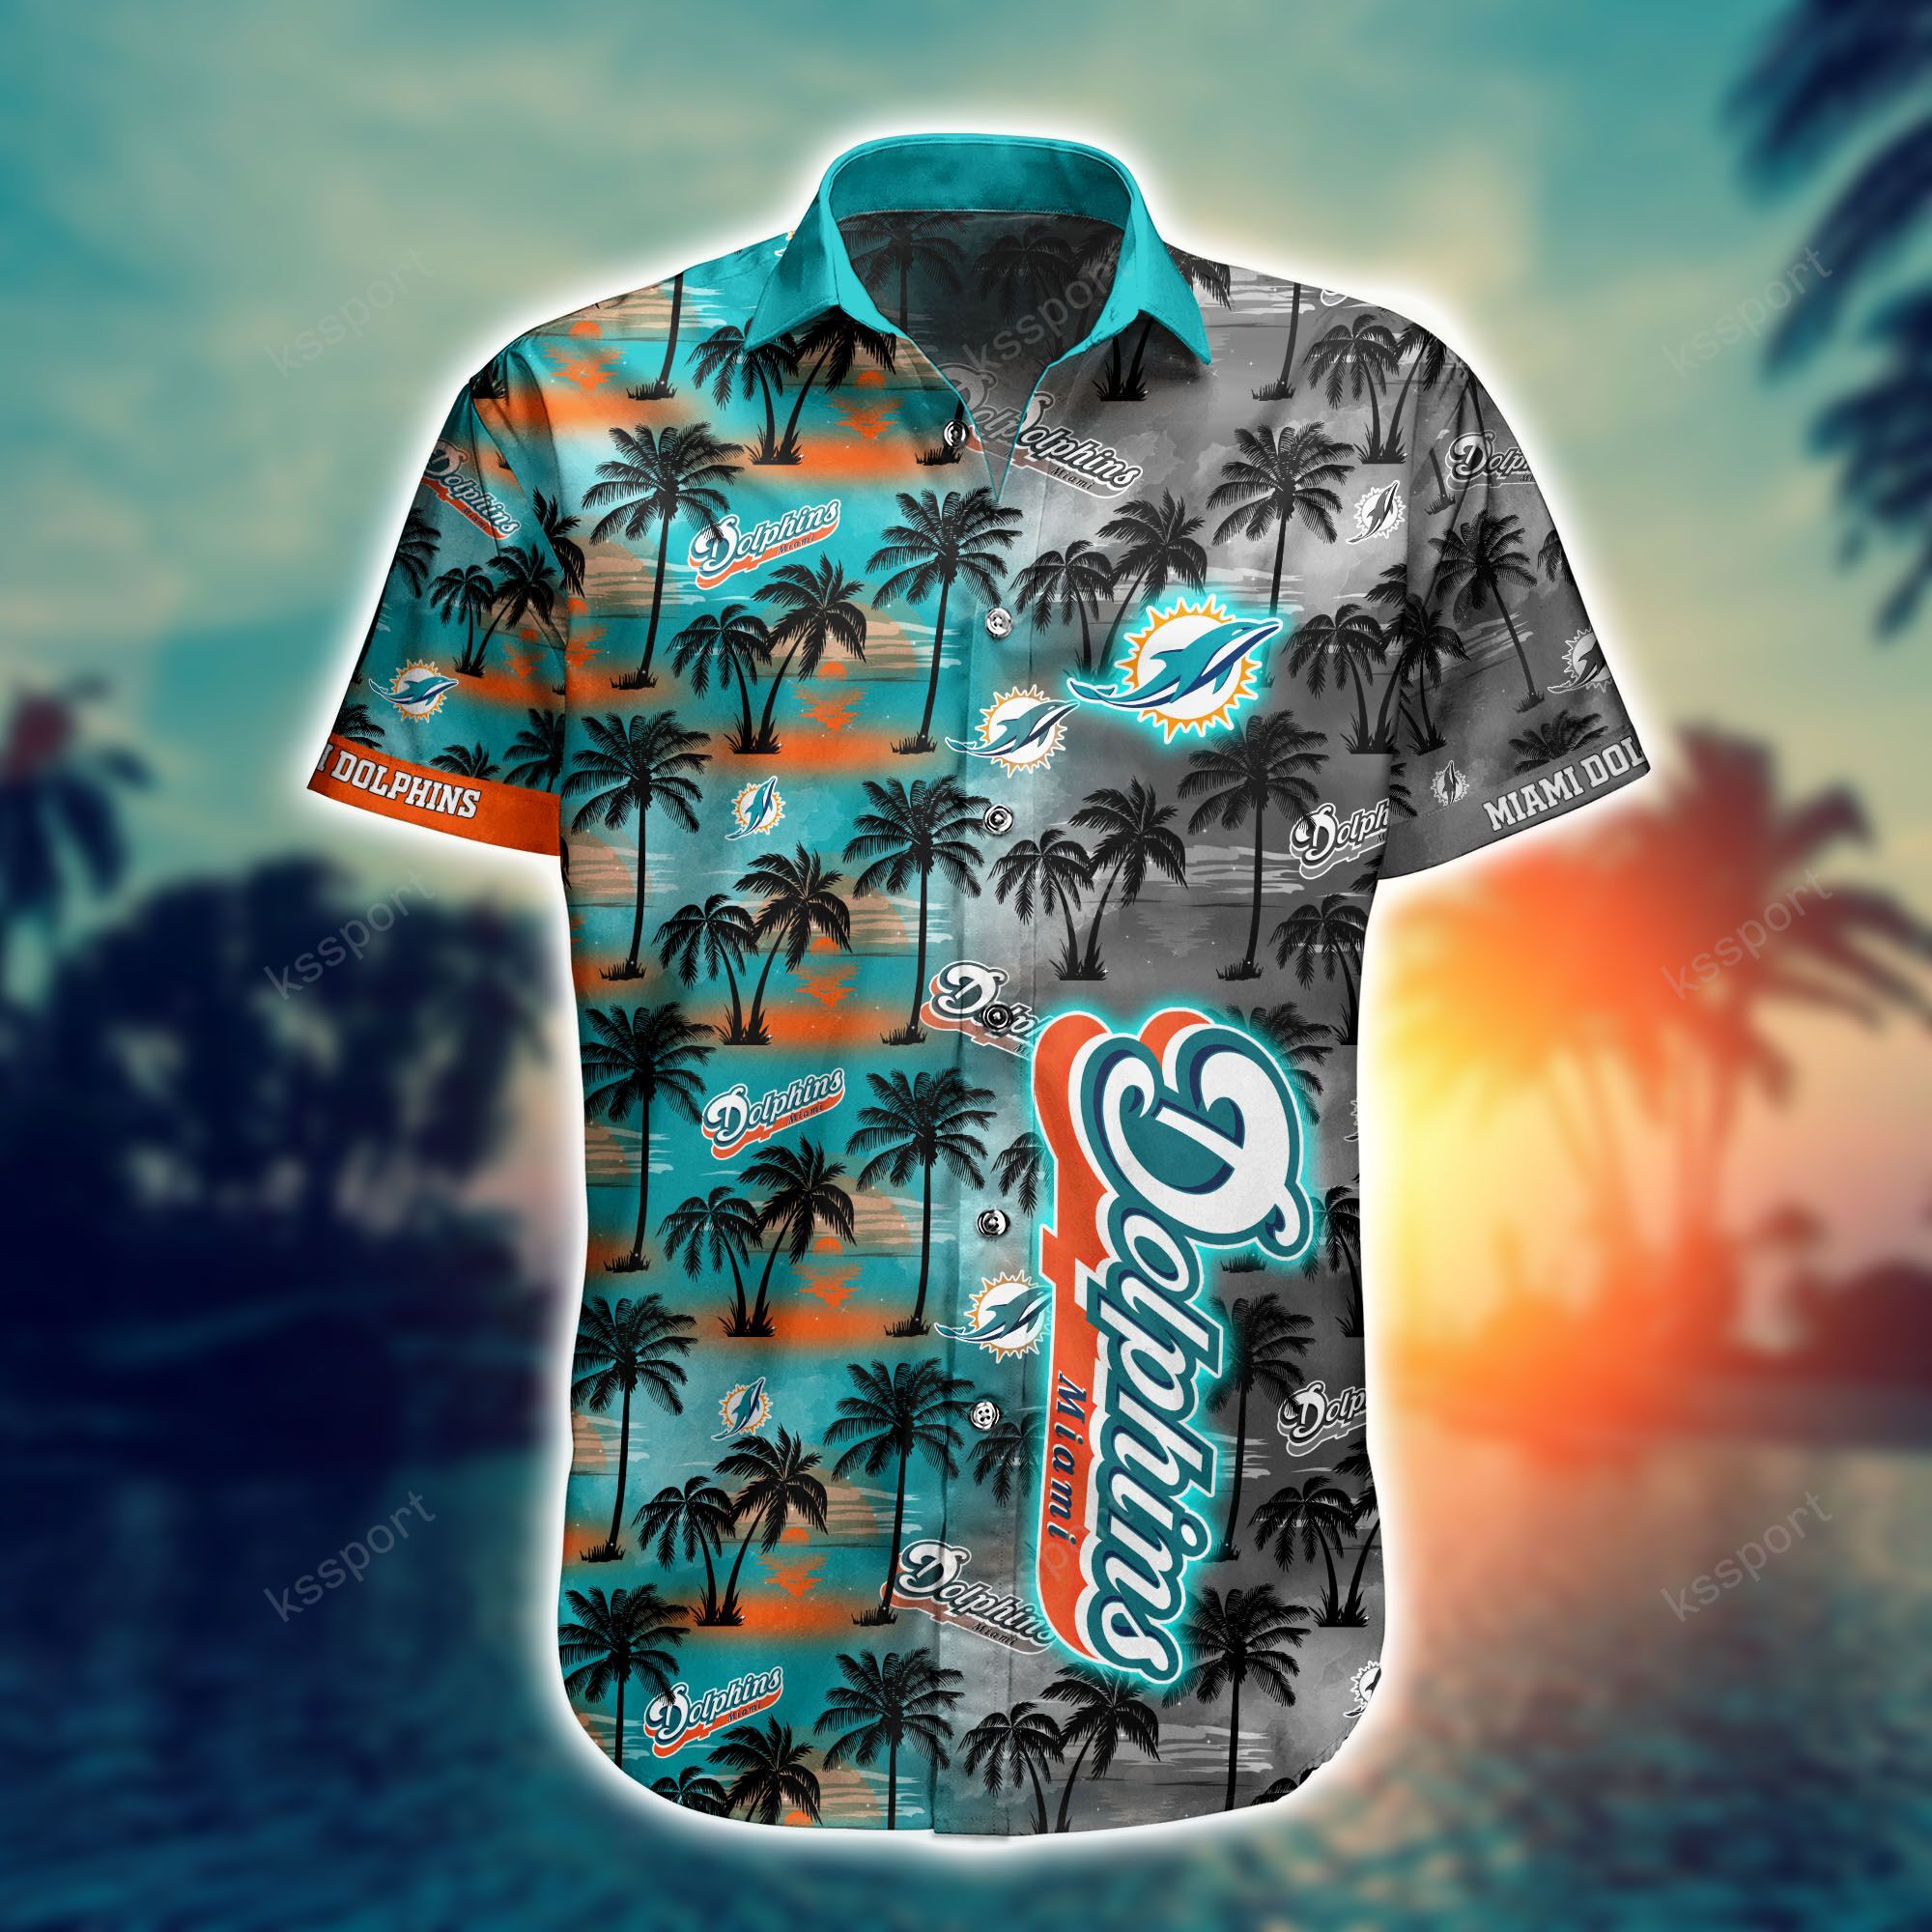 Top cool Hawaiian shirt 2022 - Make sure you get yours today before they run out! 203